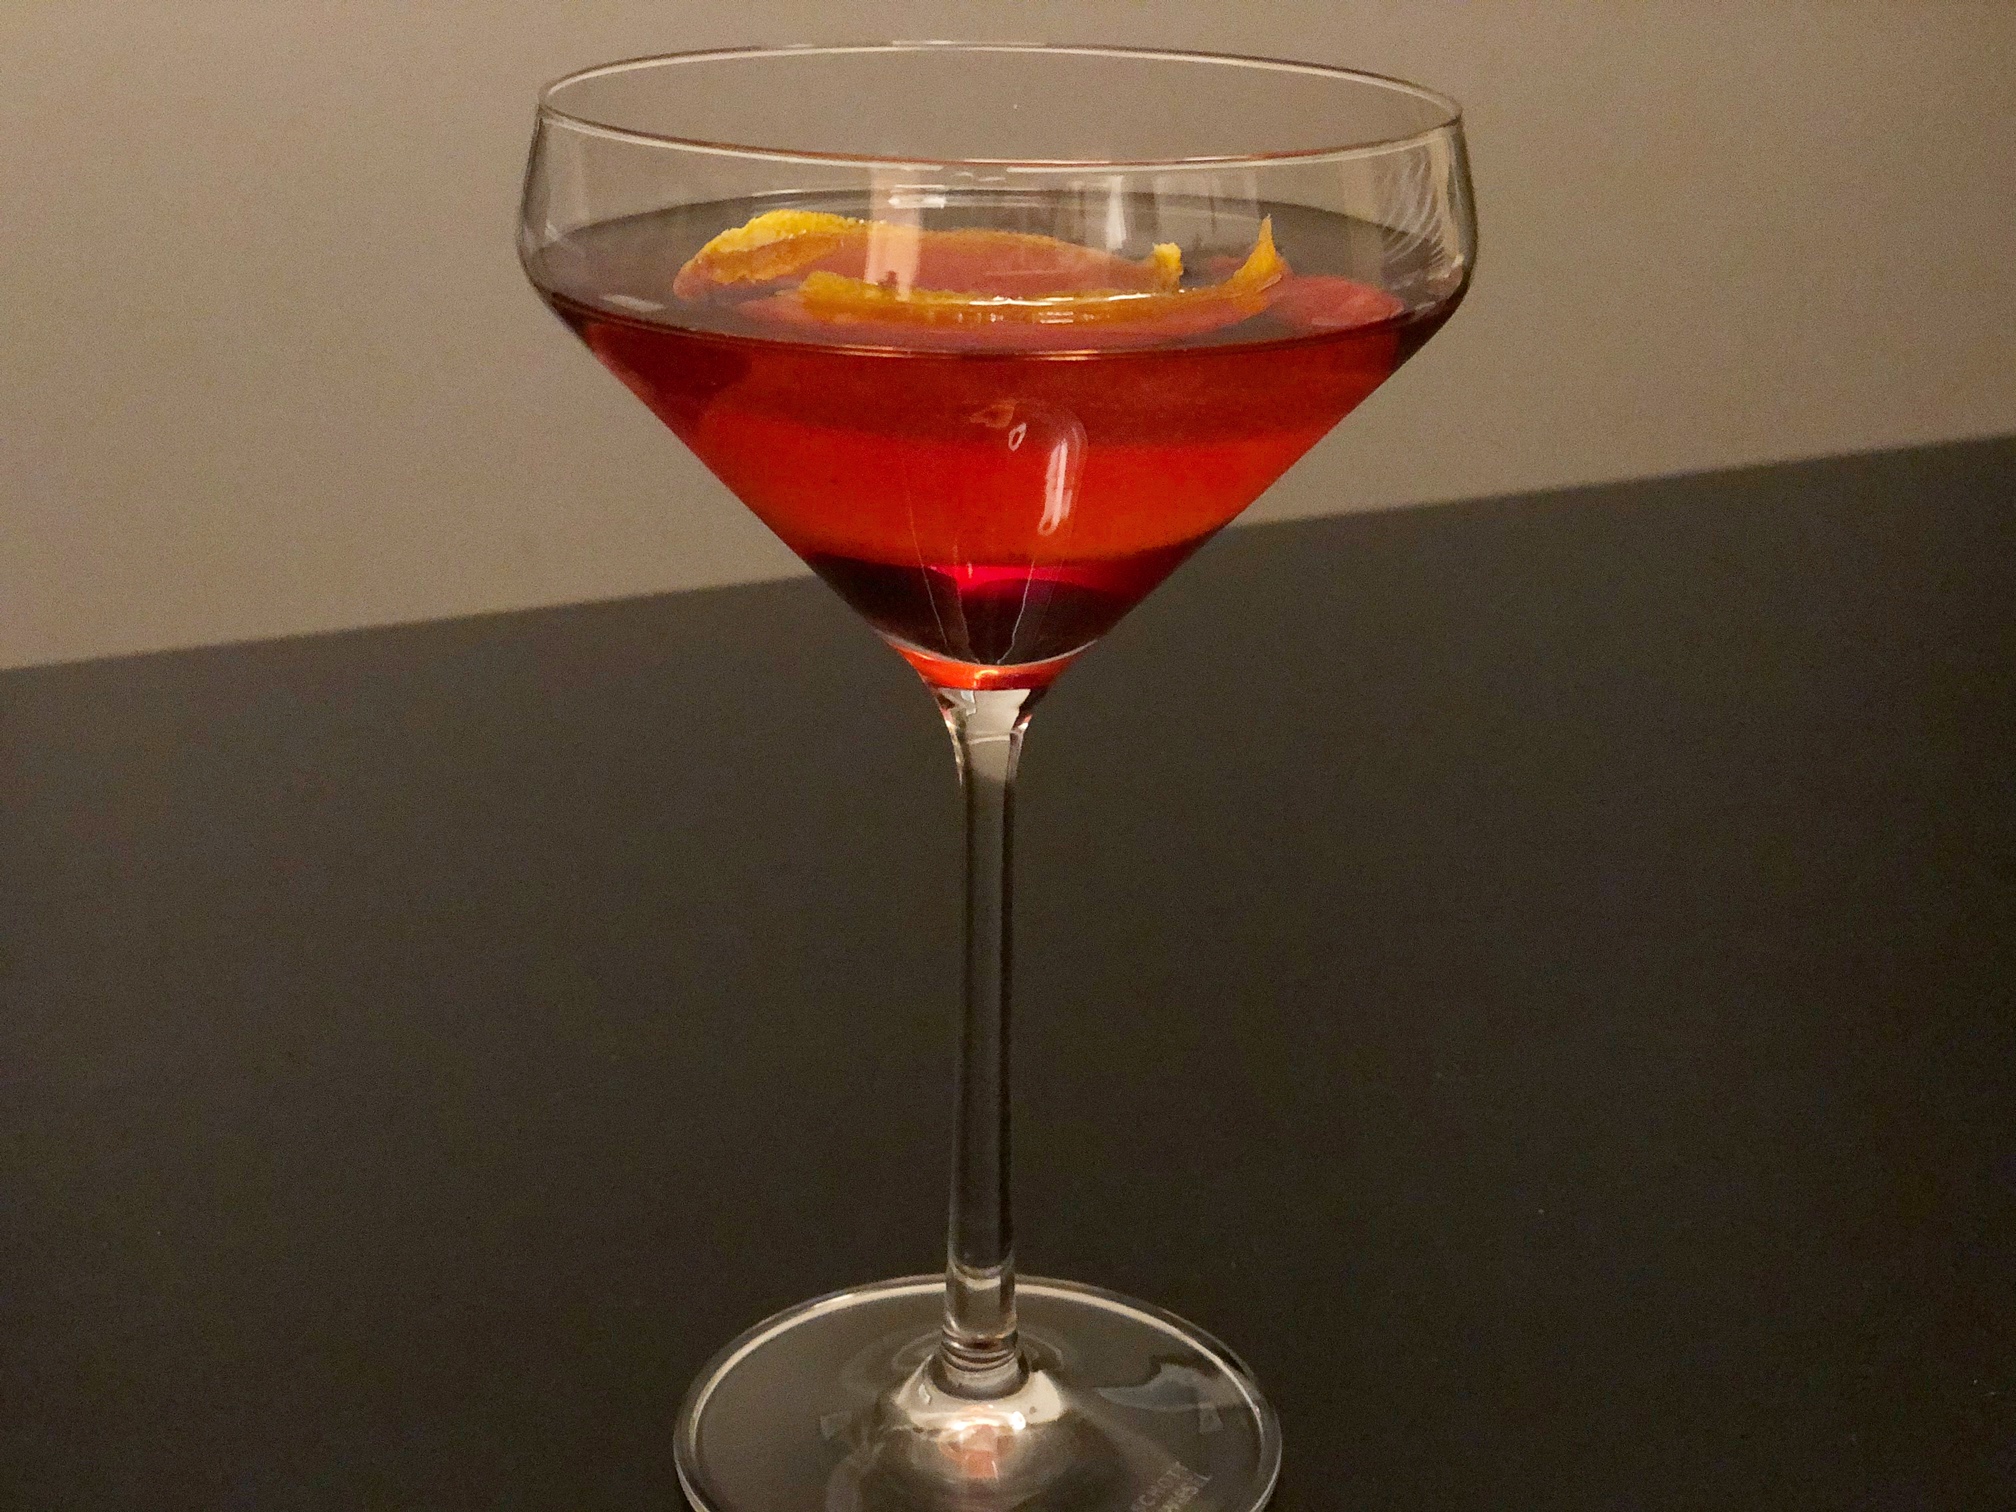 In a tall cocktail glass, a ruby red cocktail has a lemon peel garnish and a cherry at the bottom. Photo by Alyssa Buckley.